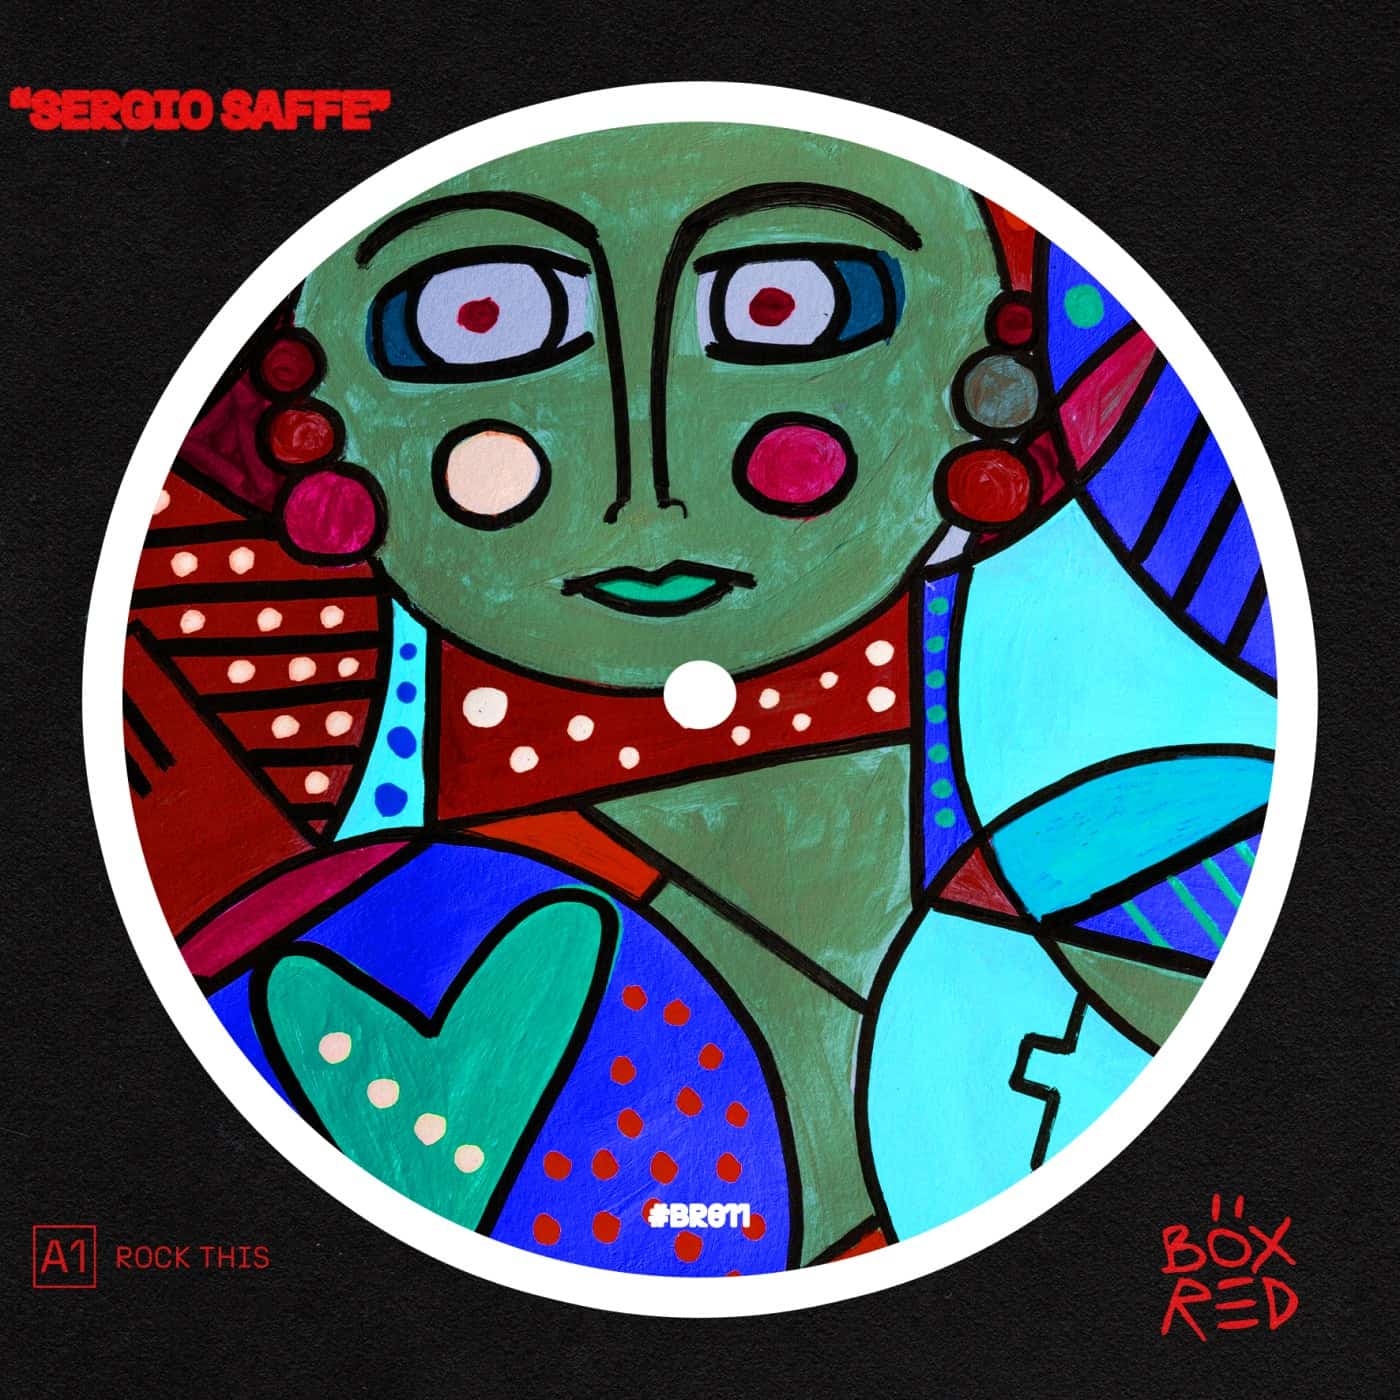 image cover: Sergio Saffe - ROCK THIS on BOX RED